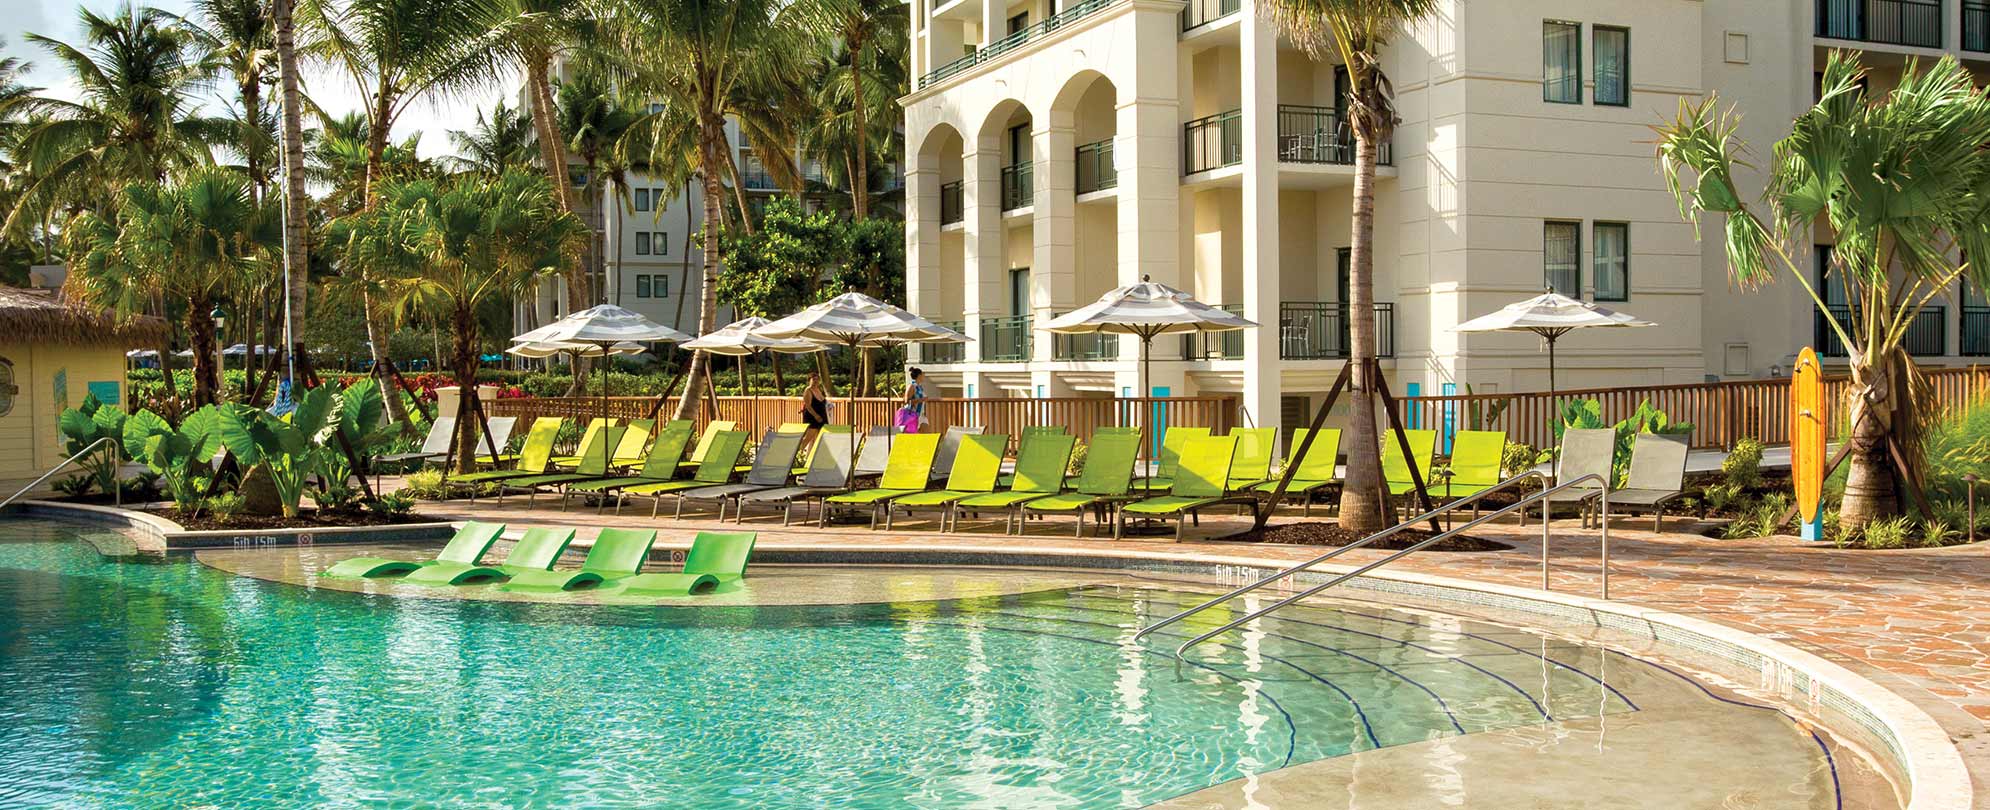 Bright green pool chairs and palm trees surround the shimmering pool at a Margaritaville Vacation Club resort.